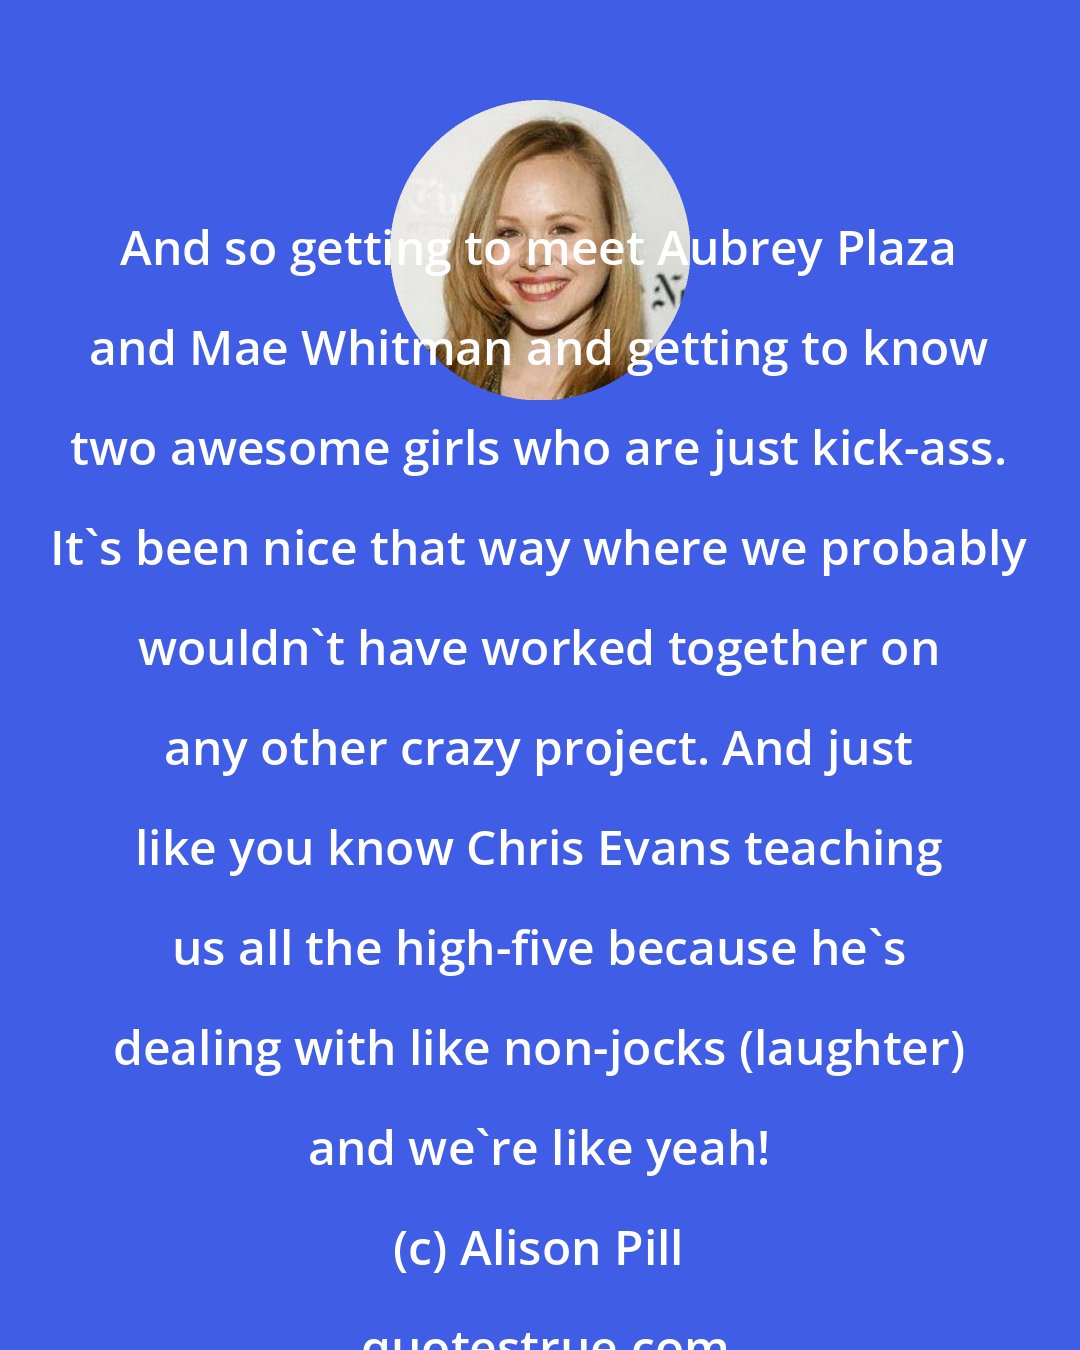 Alison Pill: And so getting to meet Aubrey Plaza and Mae Whitman and getting to know two awesome girls who are just kick-ass. It's been nice that way where we probably wouldn't have worked together on any other crazy project. And just like you know Chris Evans teaching us all the high-five because he's dealing with like non-jocks (laughter) and we're like yeah!